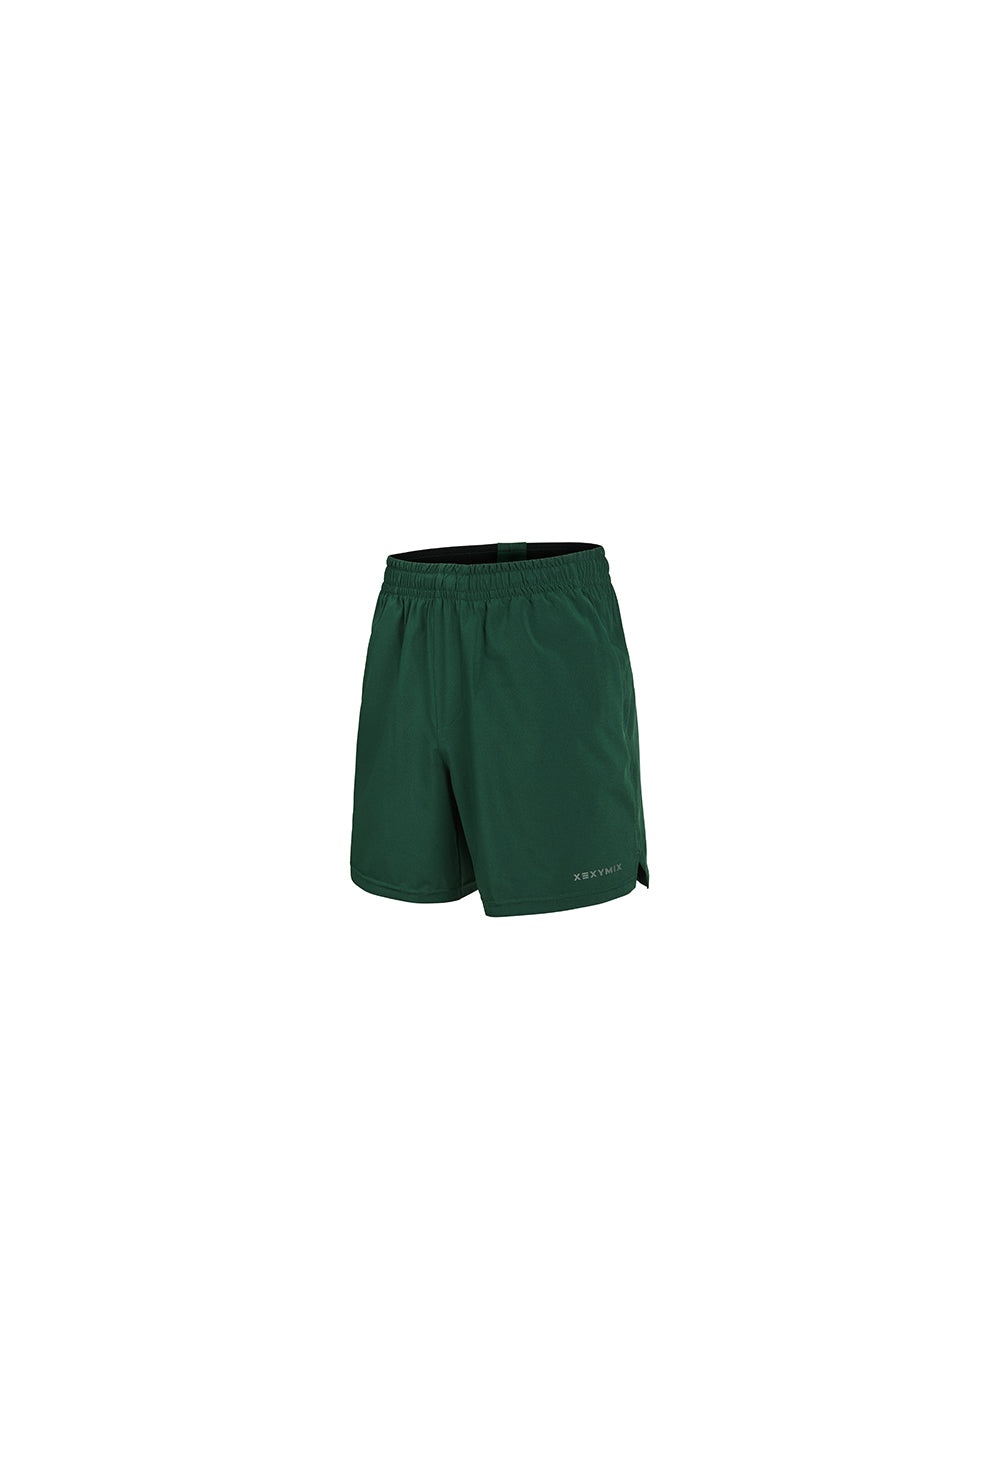 Multiple Action 6 Inch Shorts - Field Green